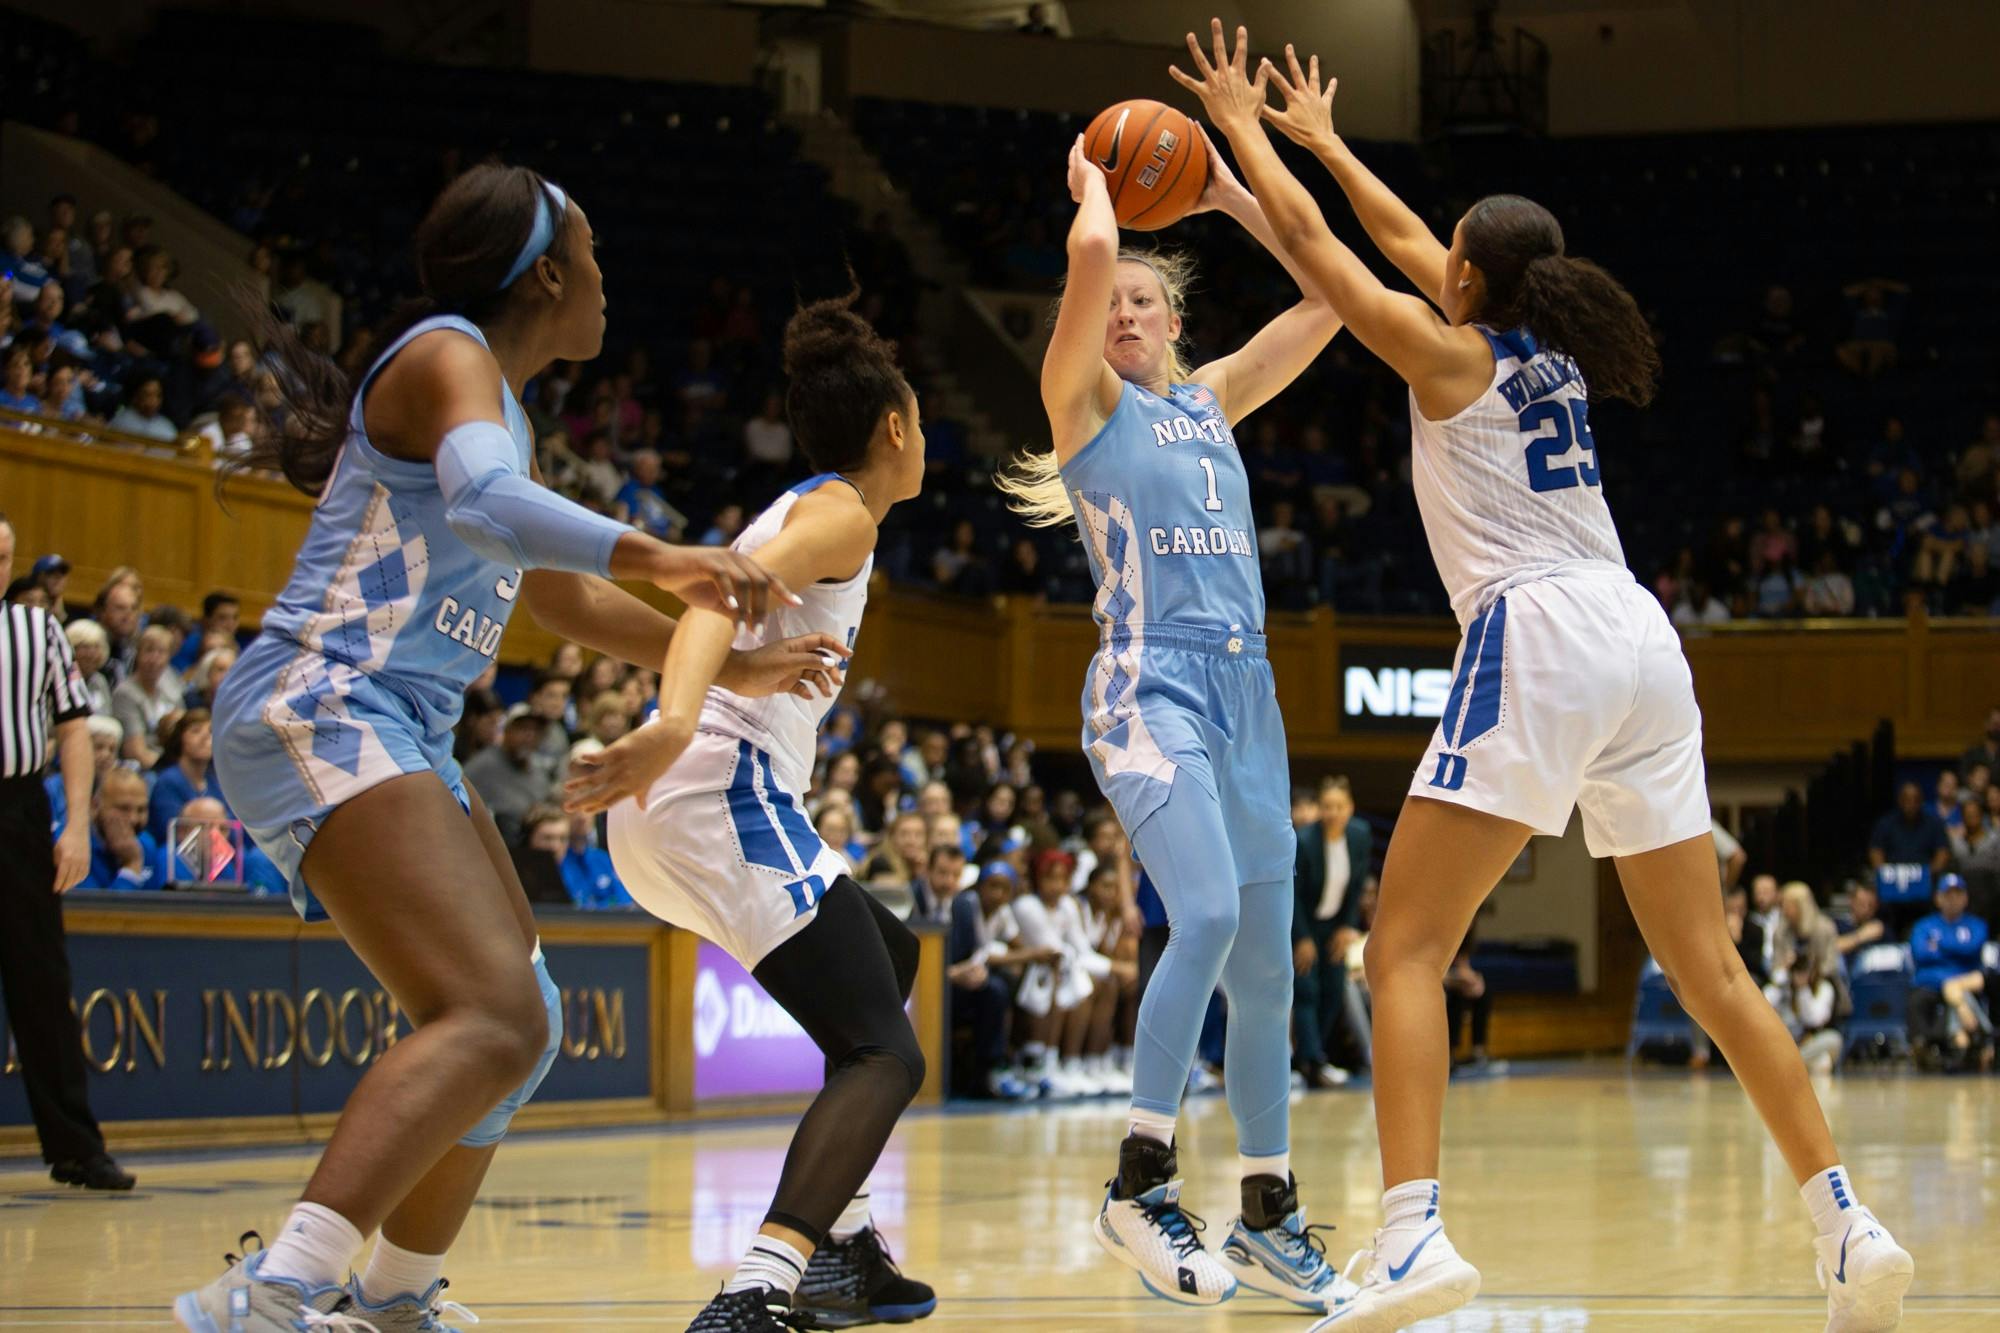 Two steps late': Duke catches UNC women 